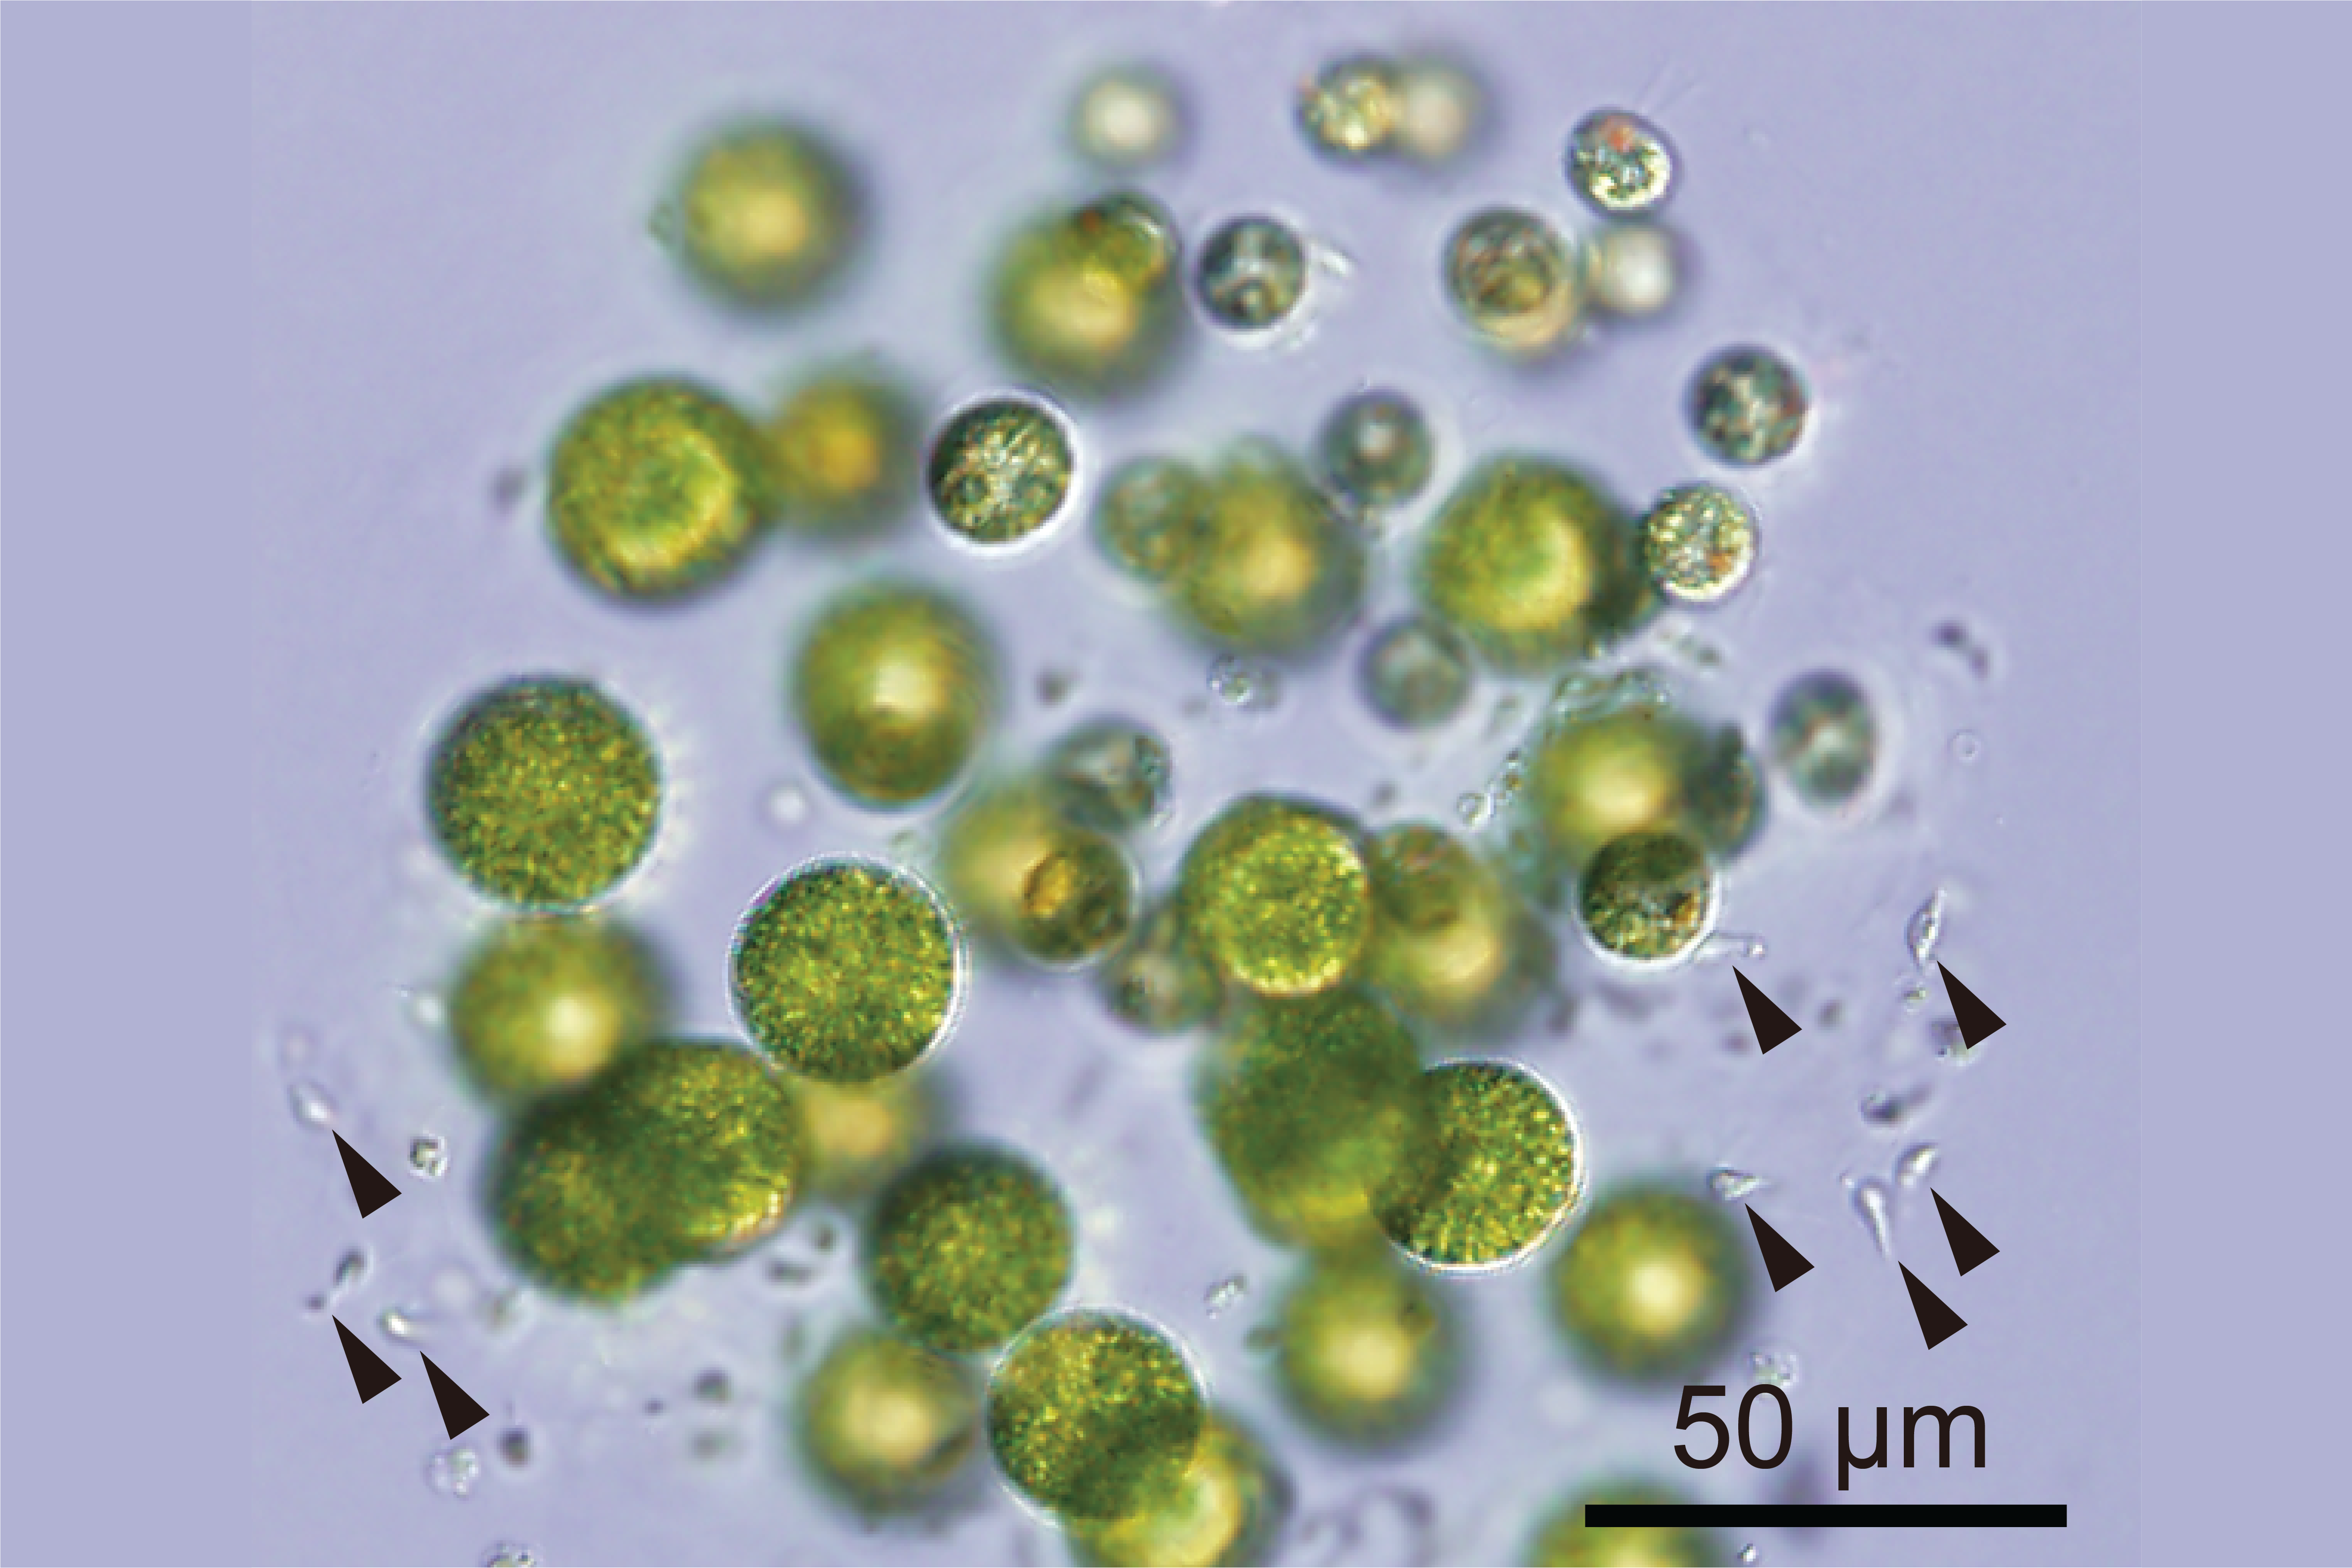 Light microscope image of green algae cells with individual sperm cells throughout the spherical colony. 